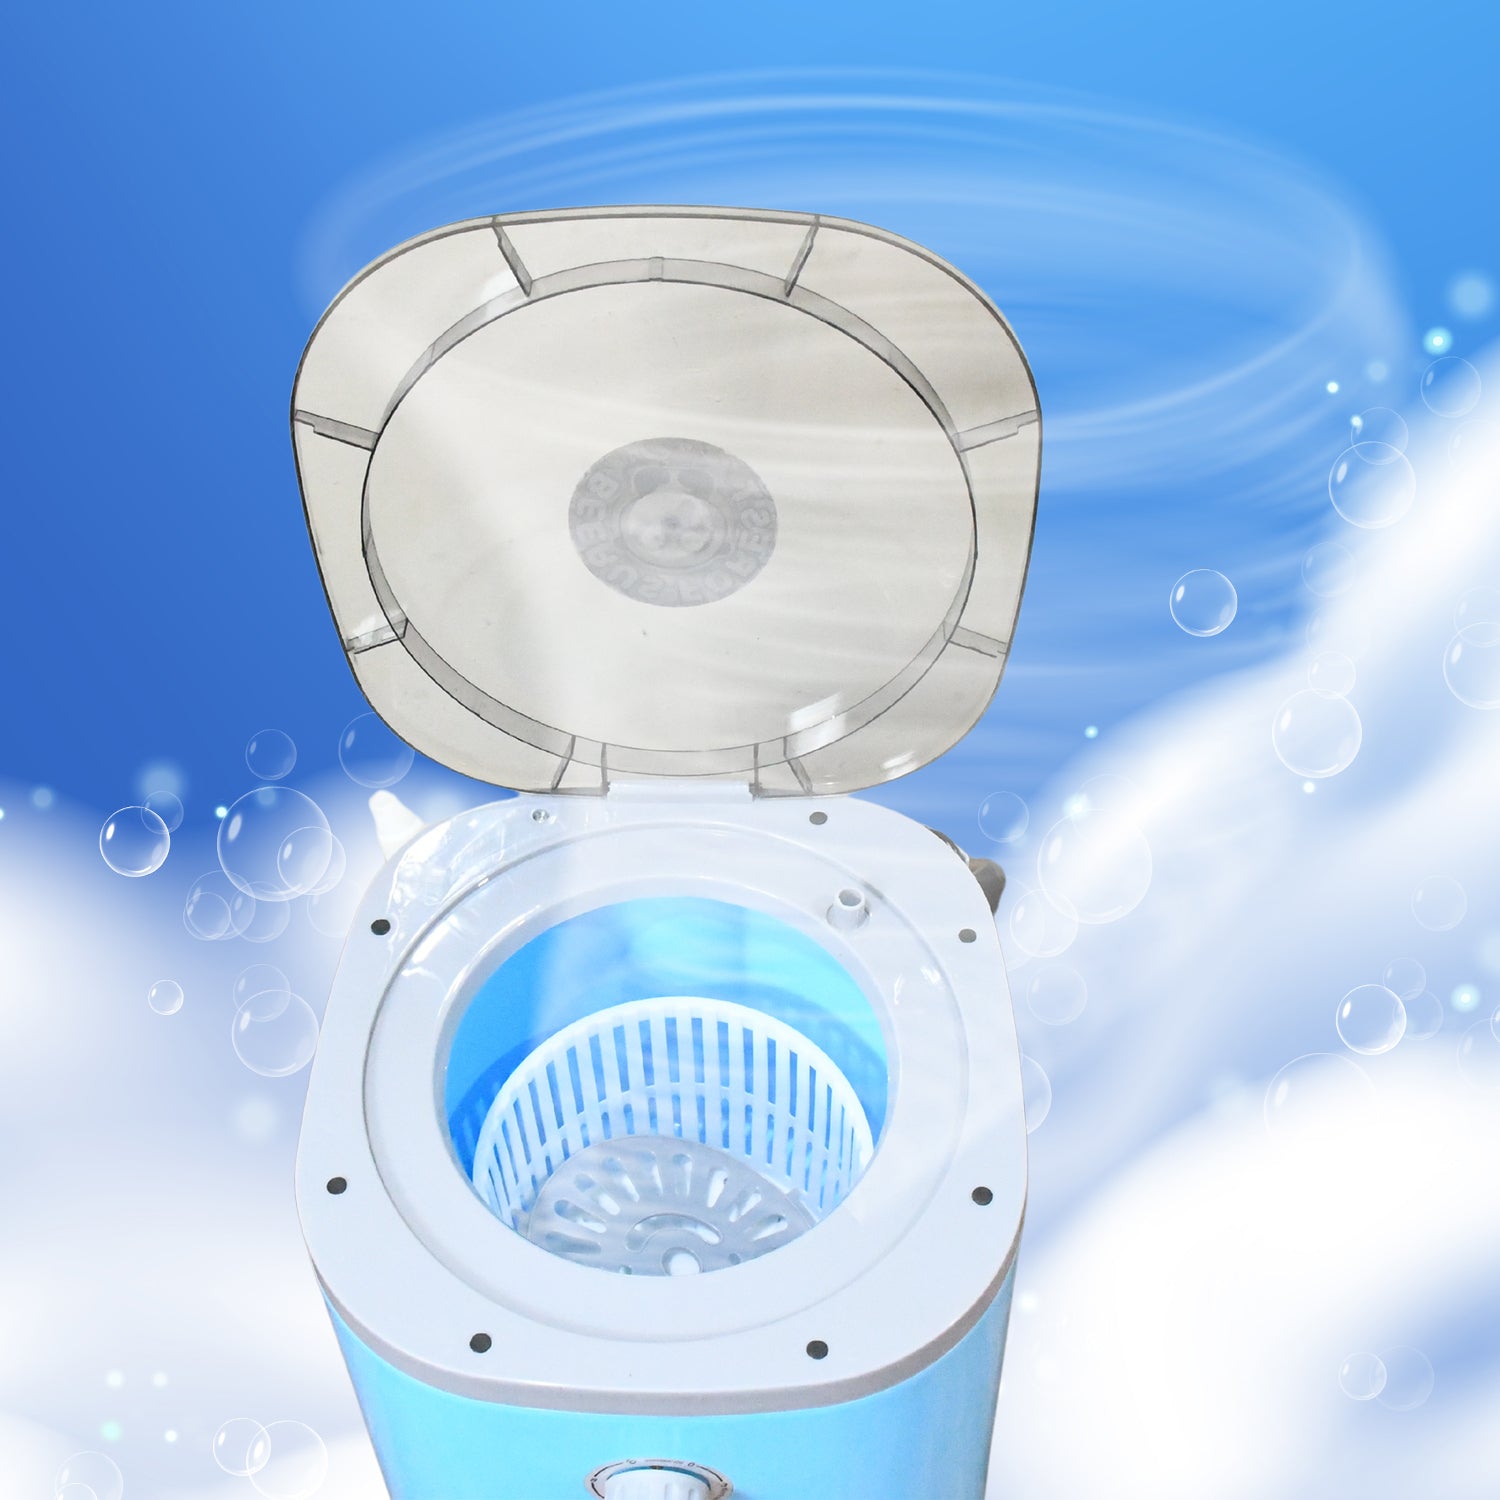 12629 PORTABLE WASHING MACHINE DEEP CLEANING WASHING MACHINE, SUITABLE FOR ALL TYPE CLOTH (11LTR)